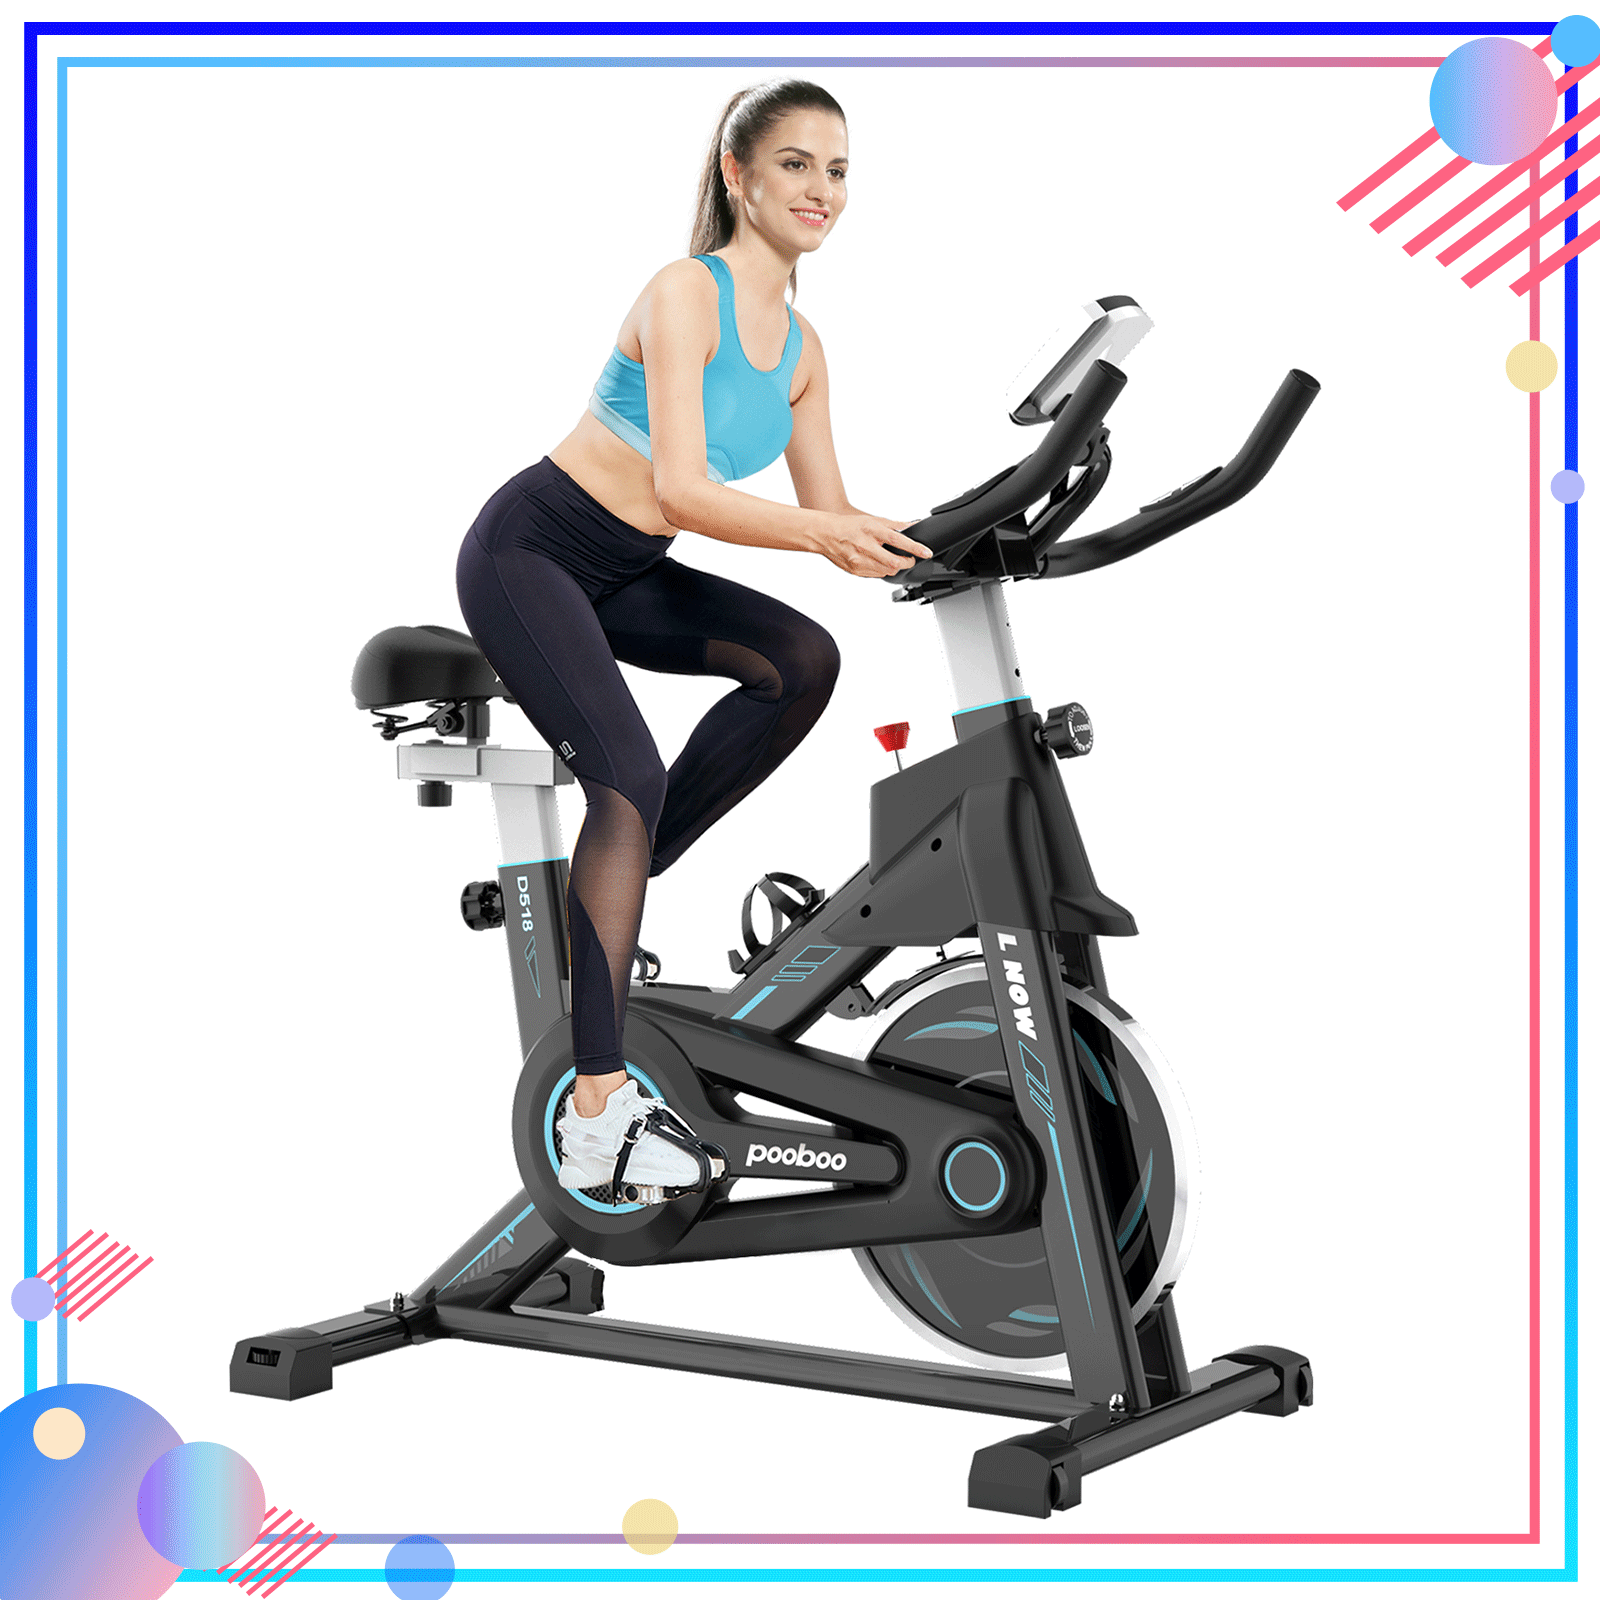 Details about   Exercise Bike Adjustable Stationary Cycling Bike Trainer Indoor Home Gym Workout 